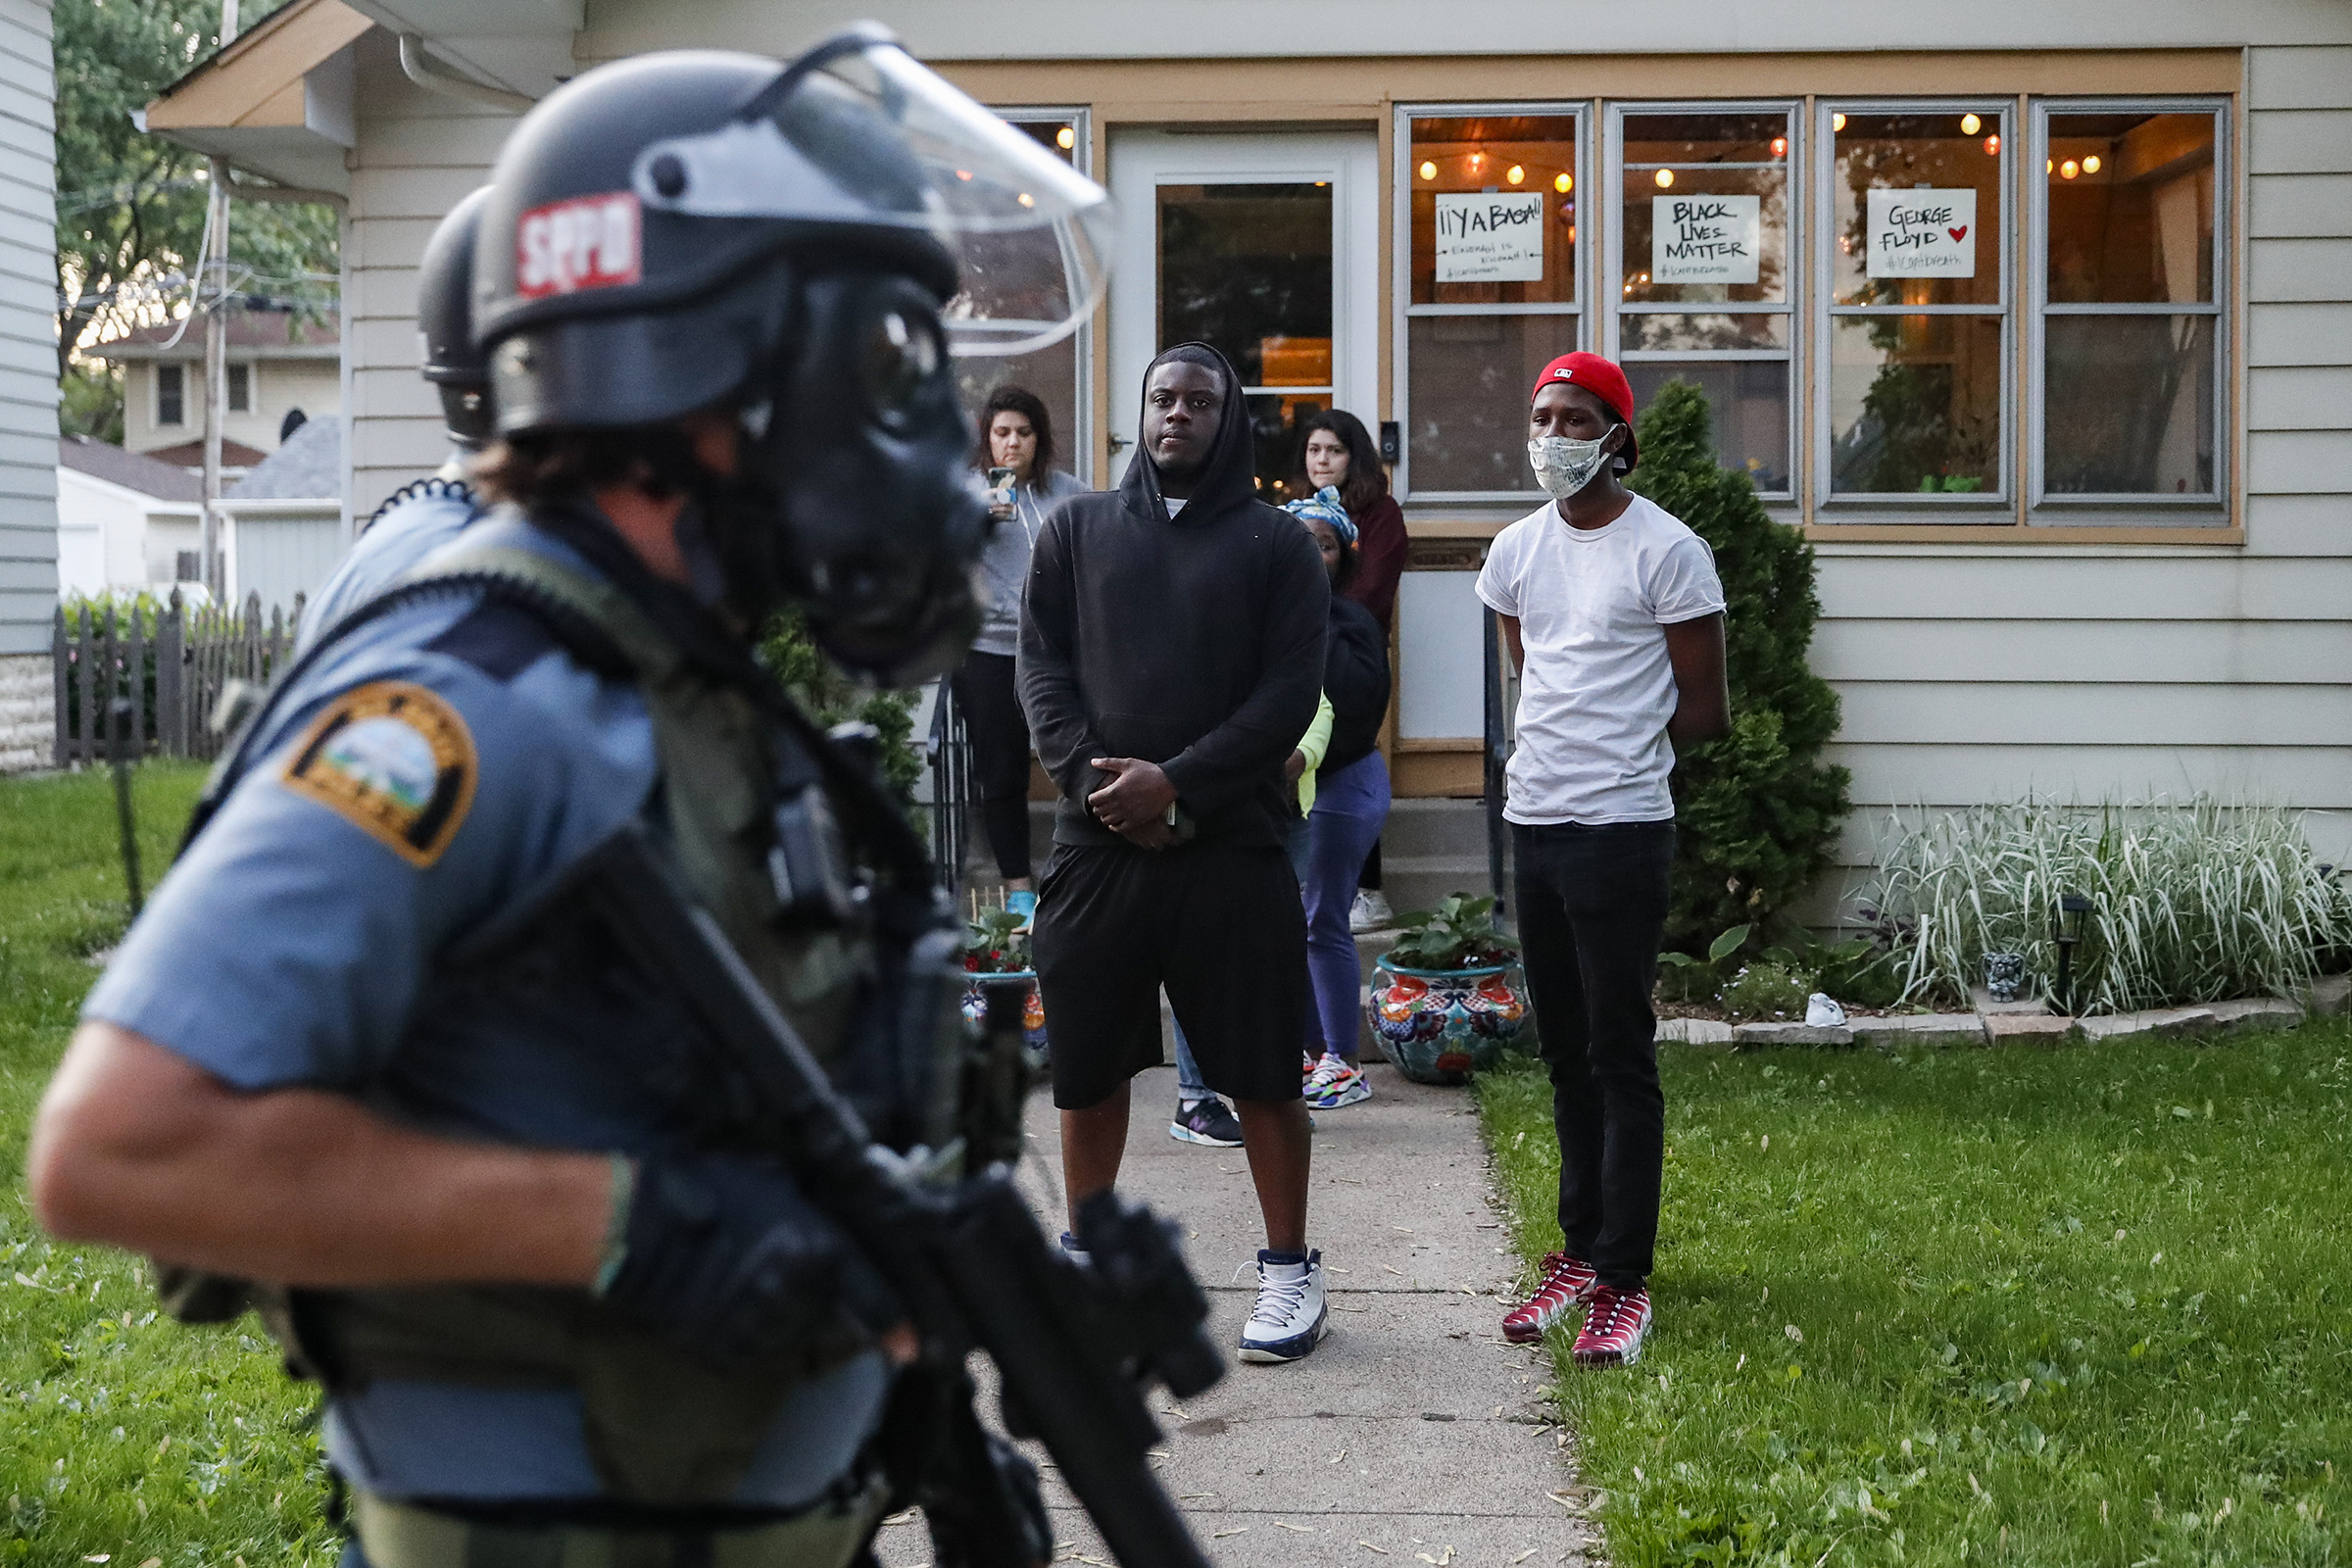 Protesters watch as police in riot gear walk down a residential street in St. Paul, Minn., on May 28. (John Minchillo—AP)